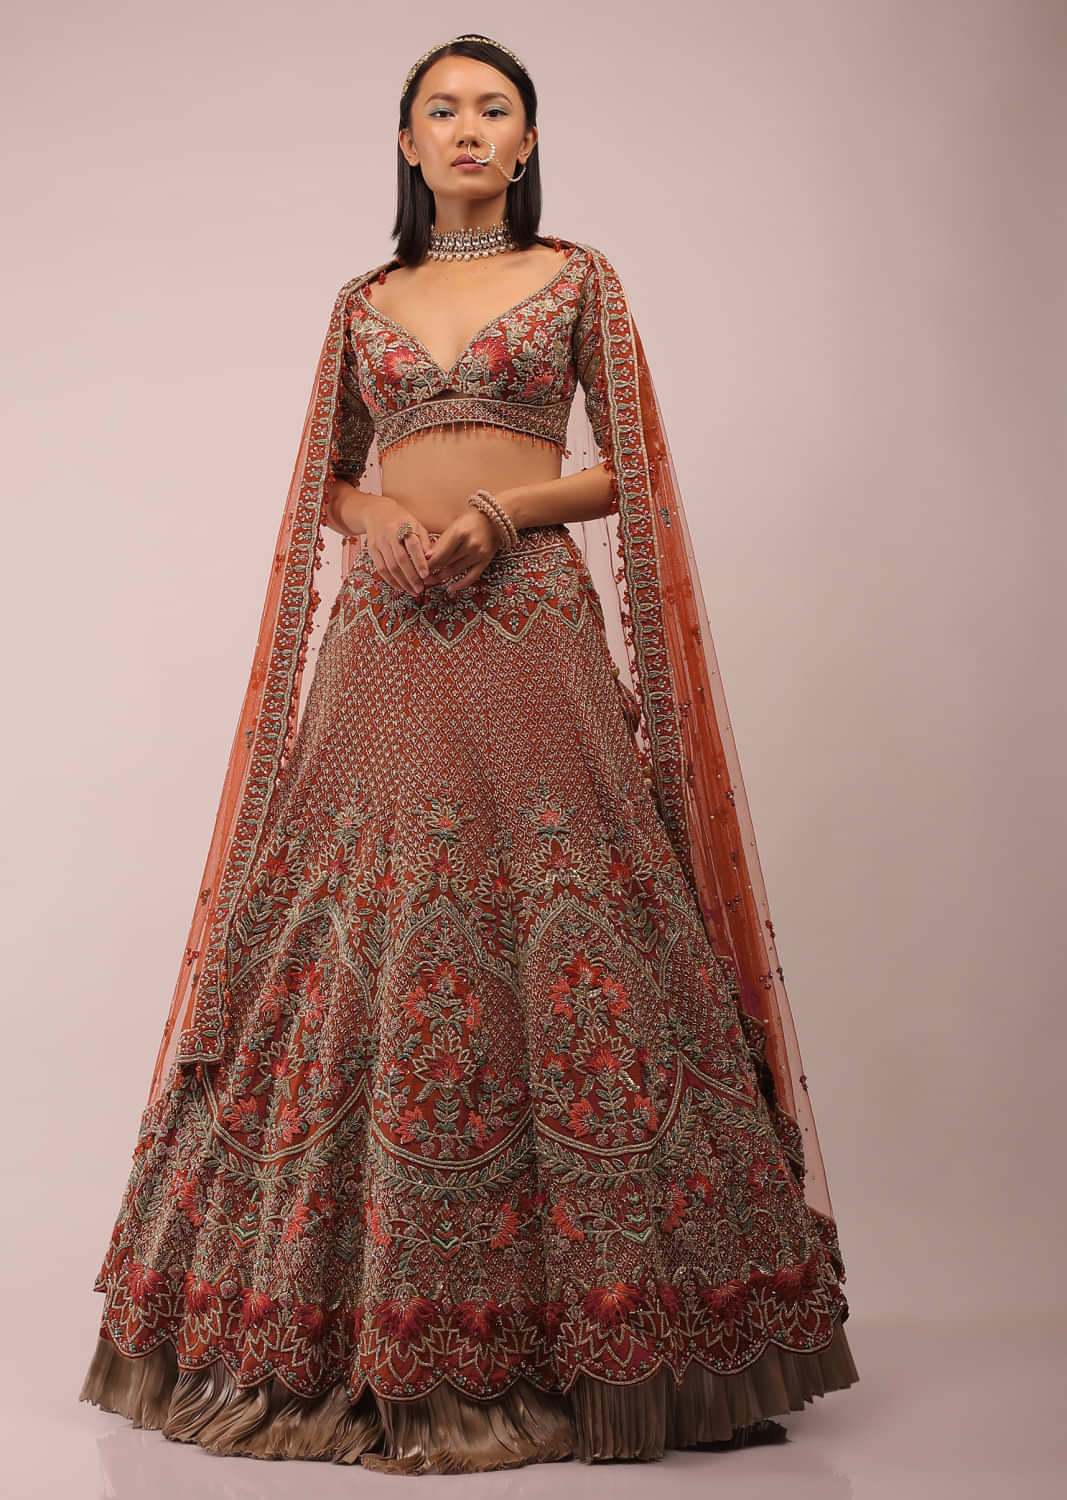 Red Lehenga In Floral Motifs Inspired By Mughal Design Embroidered In Resham And Beads In Kalis, Choli In Scalloped Neckline In Resham Work Embroidery